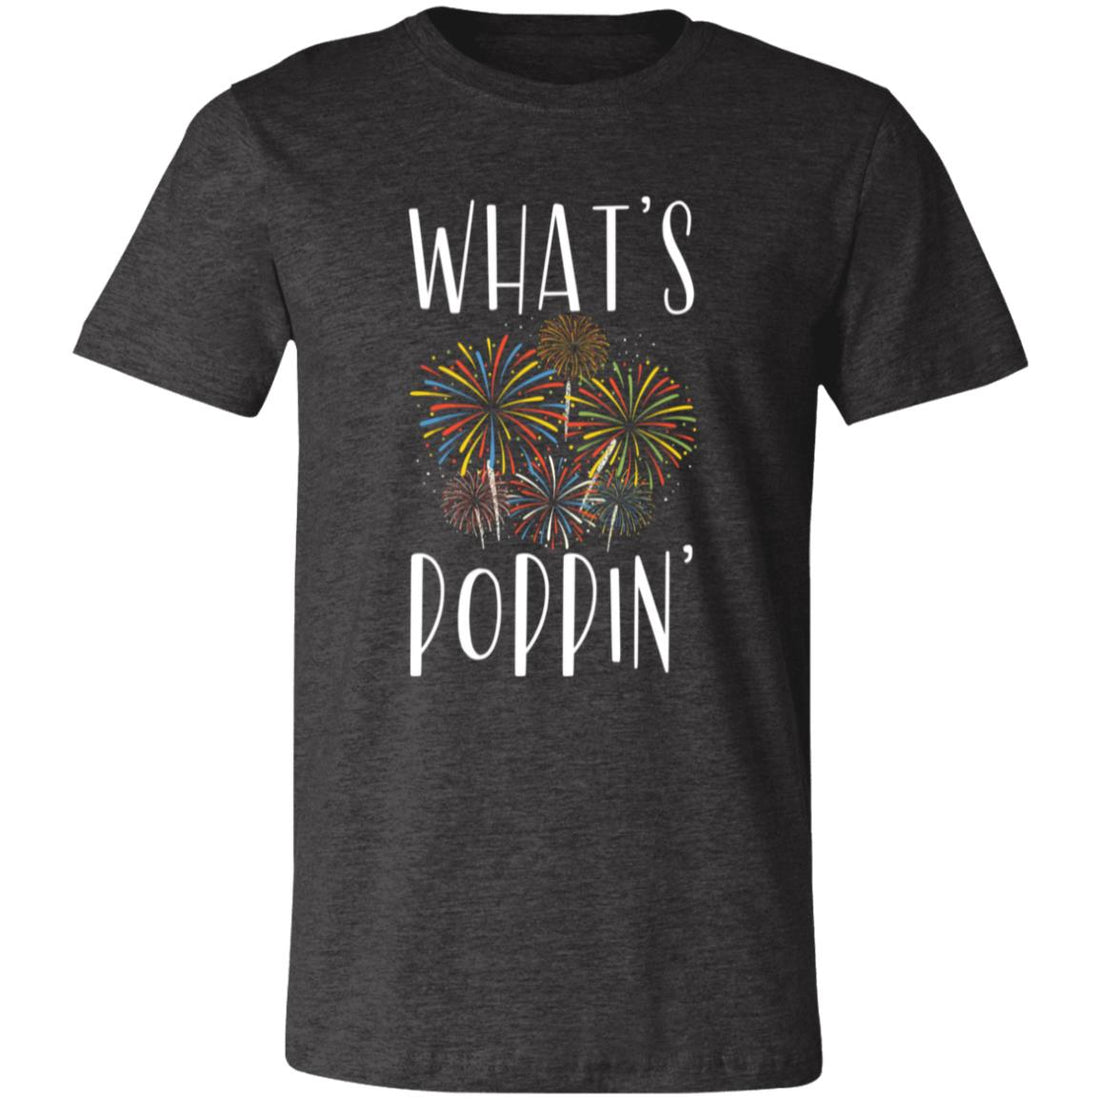 What's Poppin' T-Shirt - T-Shirts - Positively Sassy - What's Poppin' T-Shirt